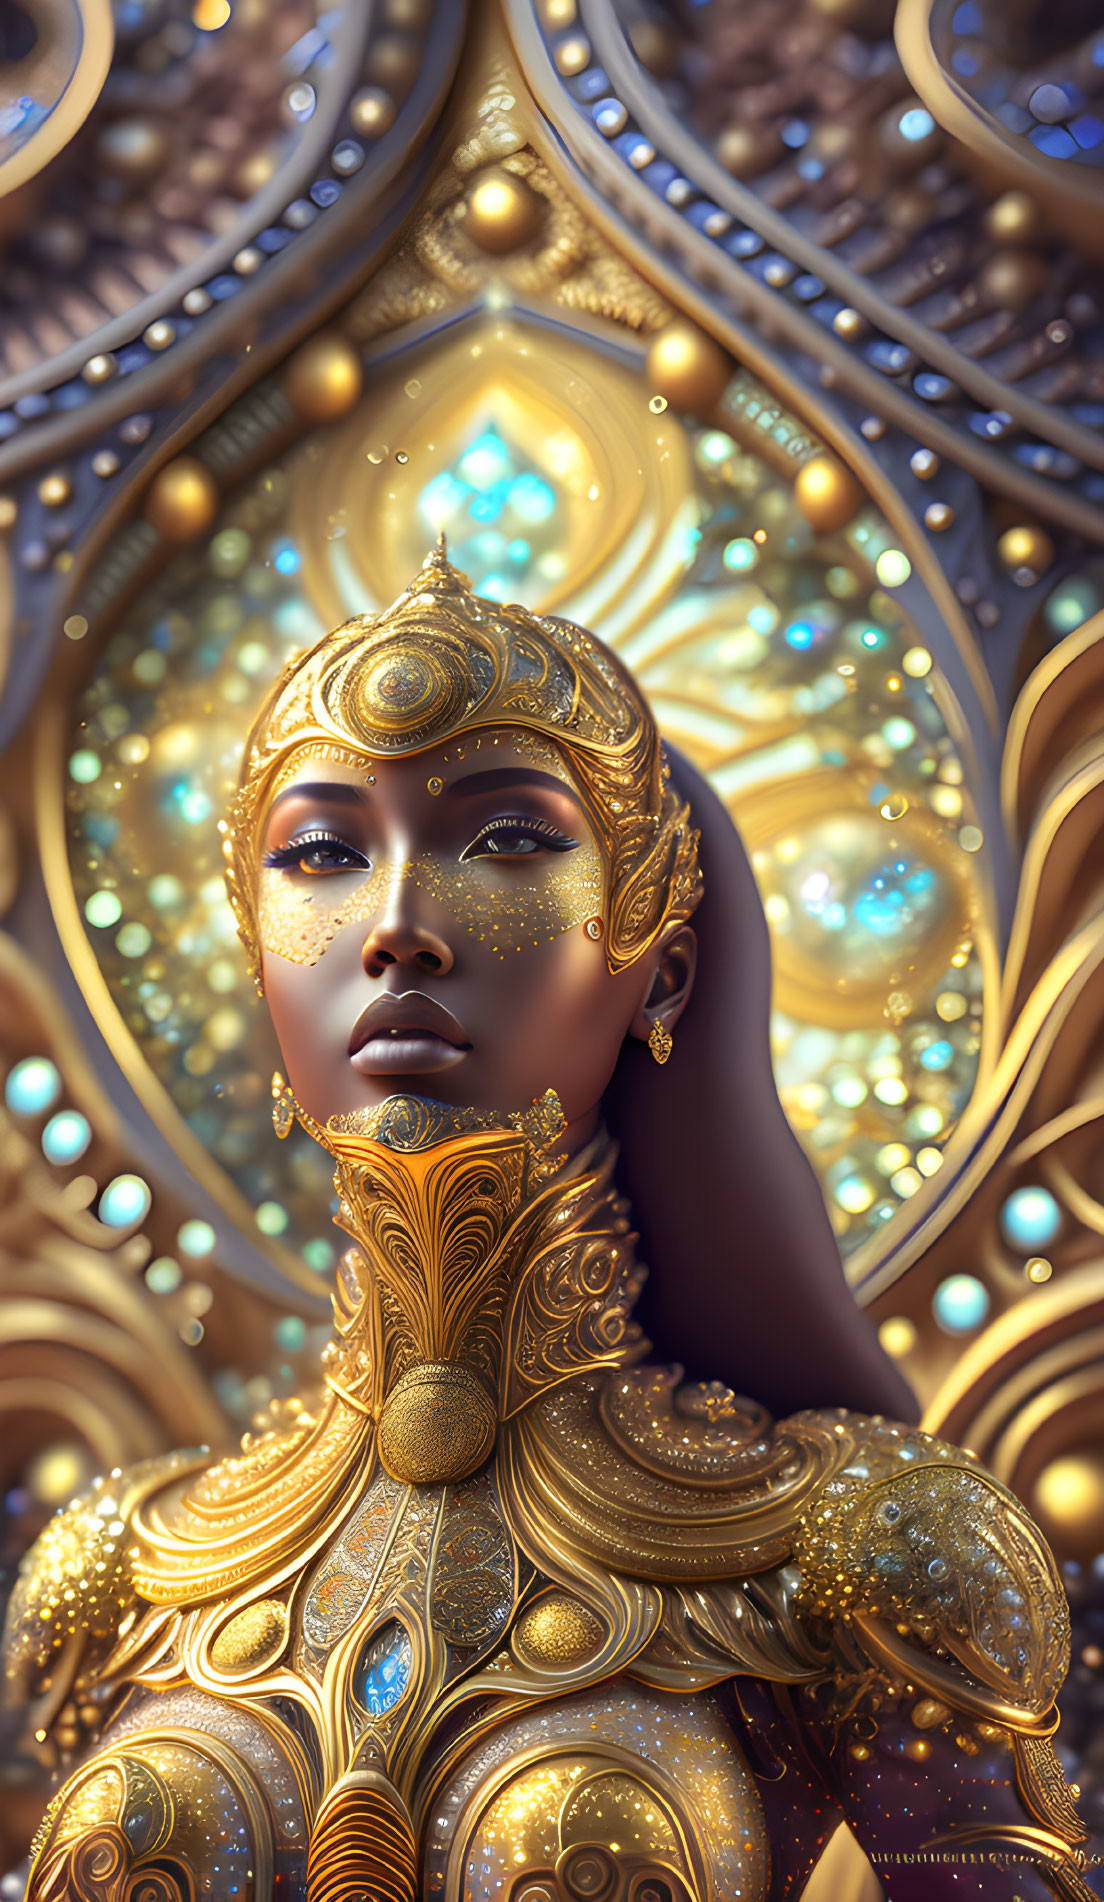 Regal figure with golden skin and ornate headdress and armor against luminous mandala background